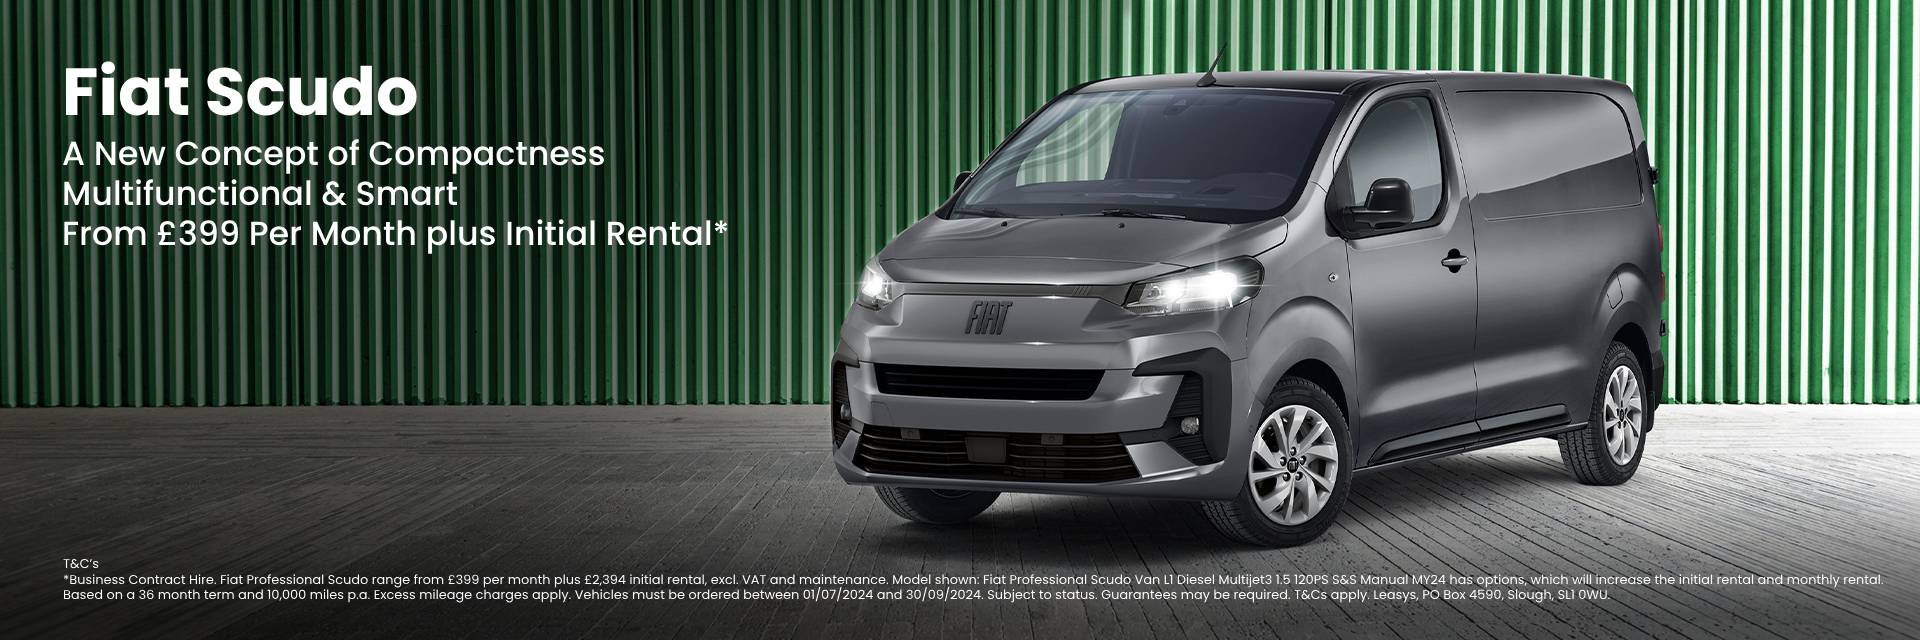 Fiat Scudo From £399 Per Month